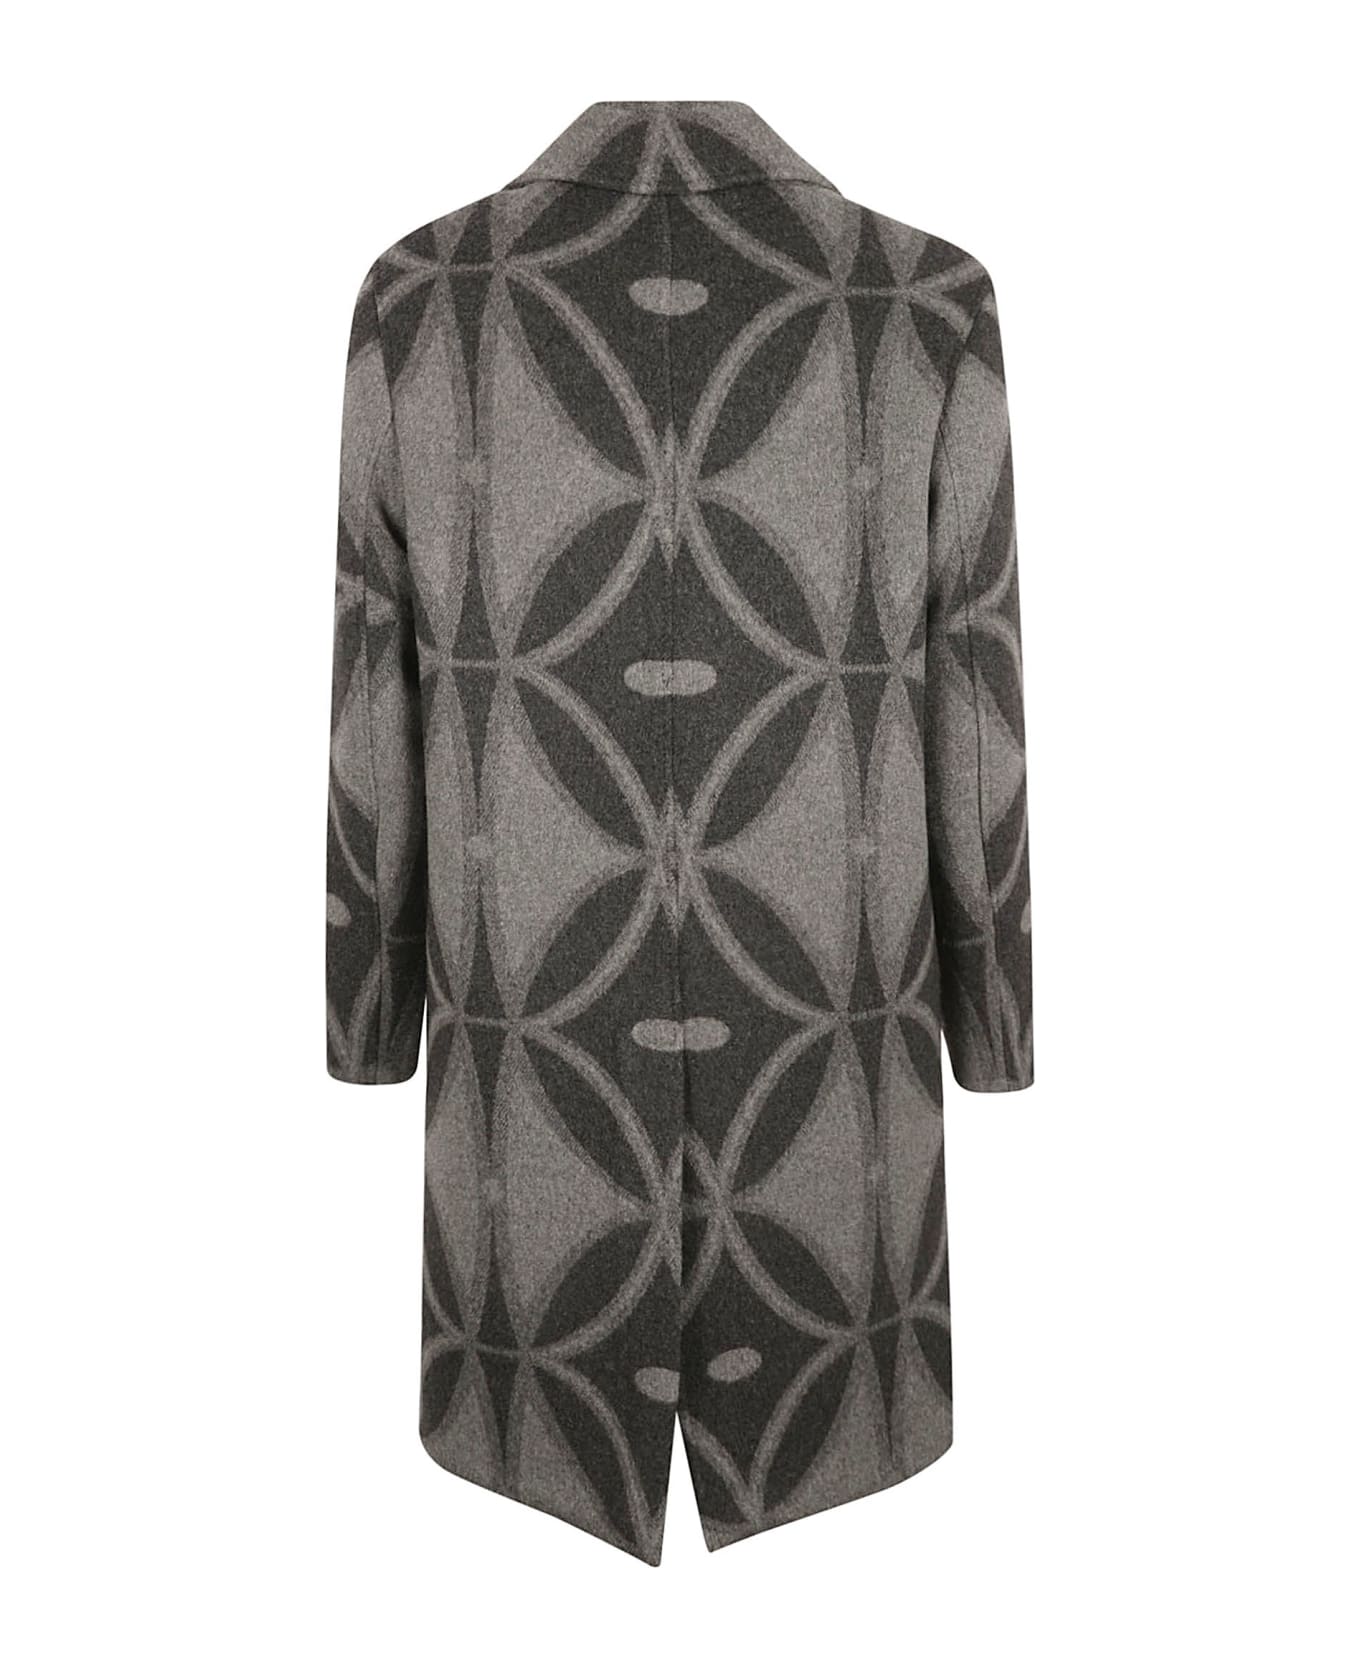 Etro Patterned Button-up Coat - Gray コート